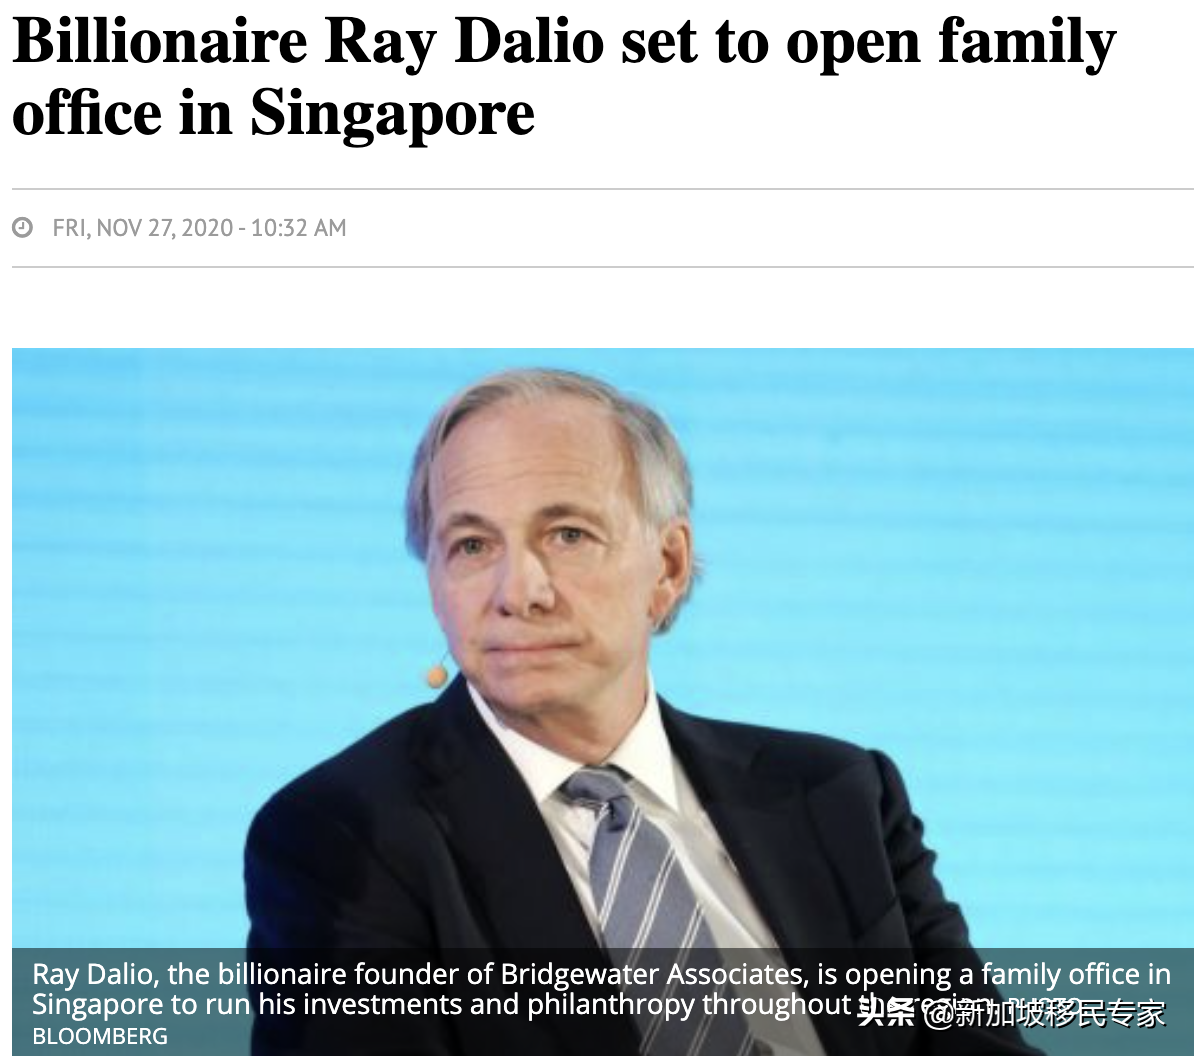 Dario, the founder of Bridgewater, announced the establishment of a family  office in Singapore - iNEWS